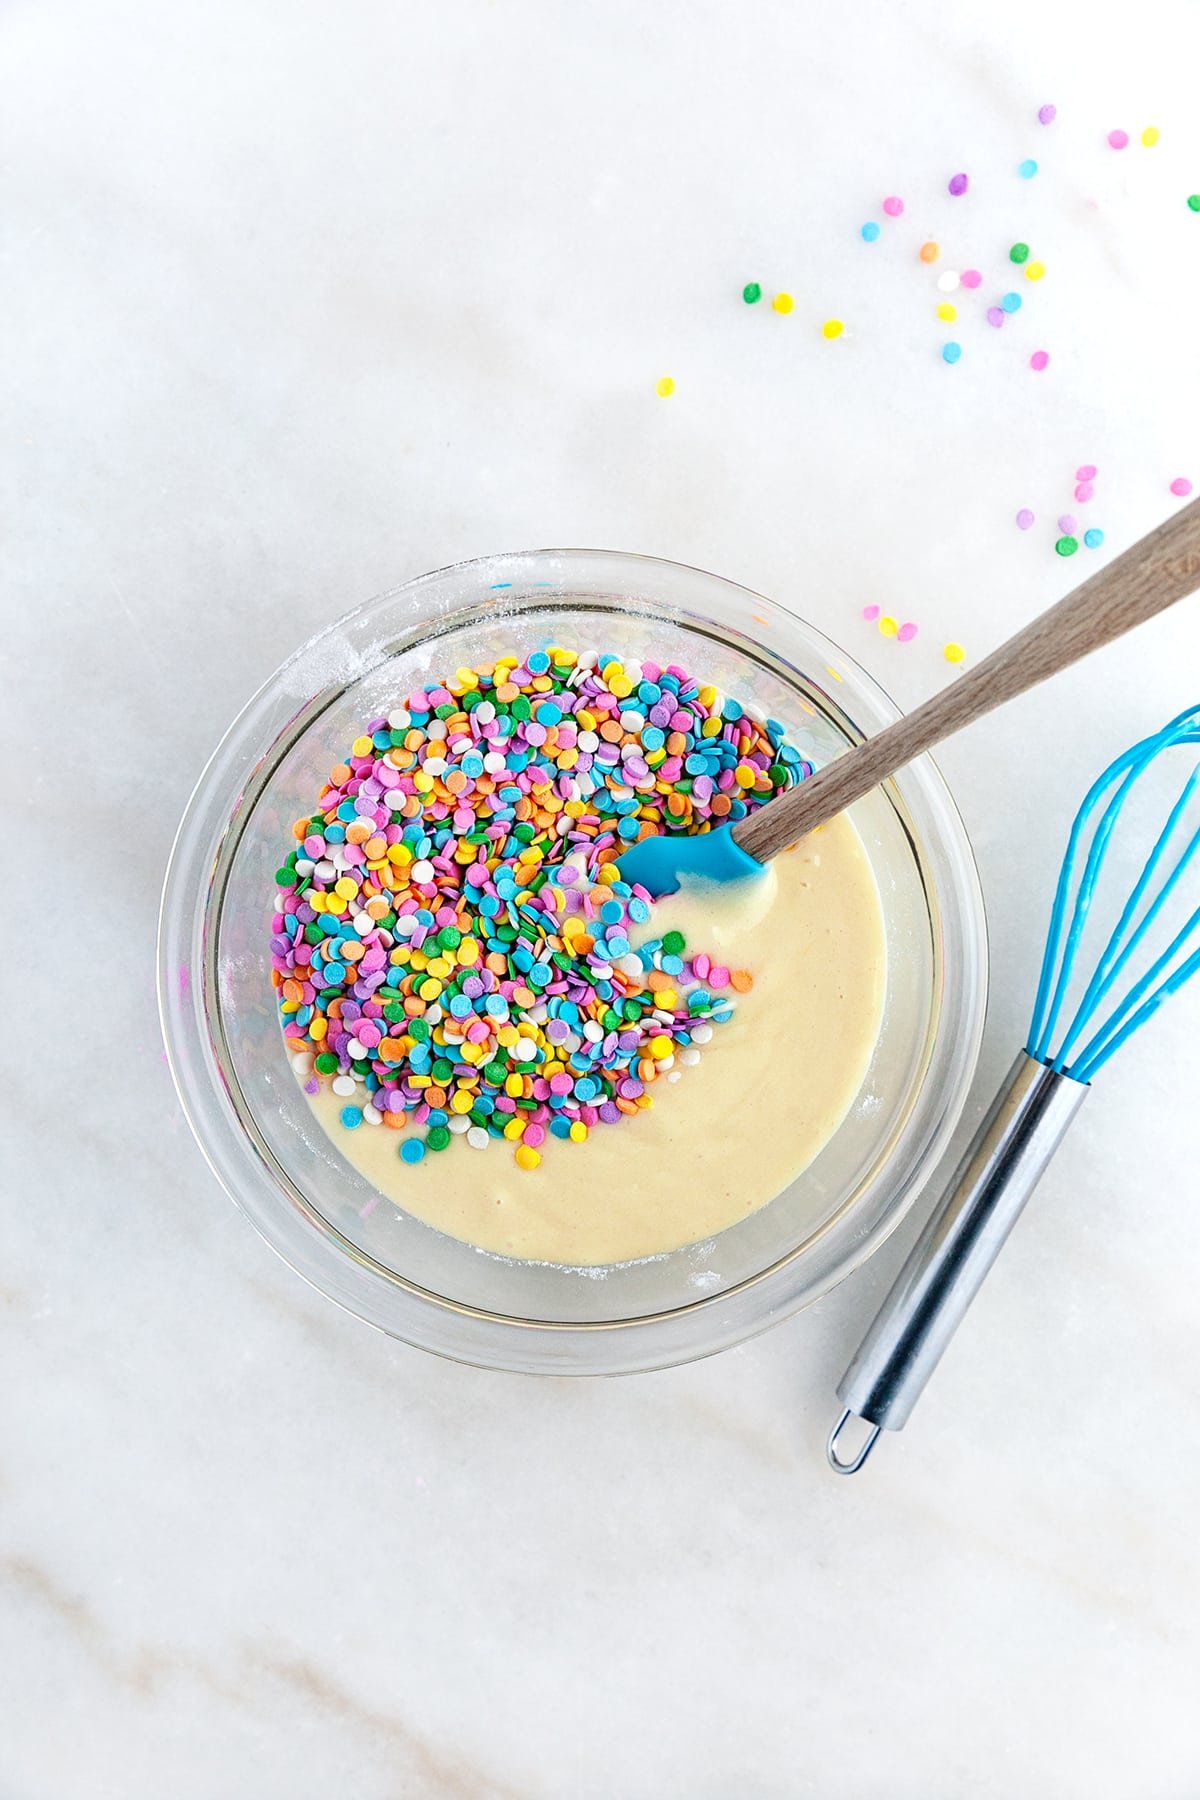 Adding confetti sprinkles to the batter. 